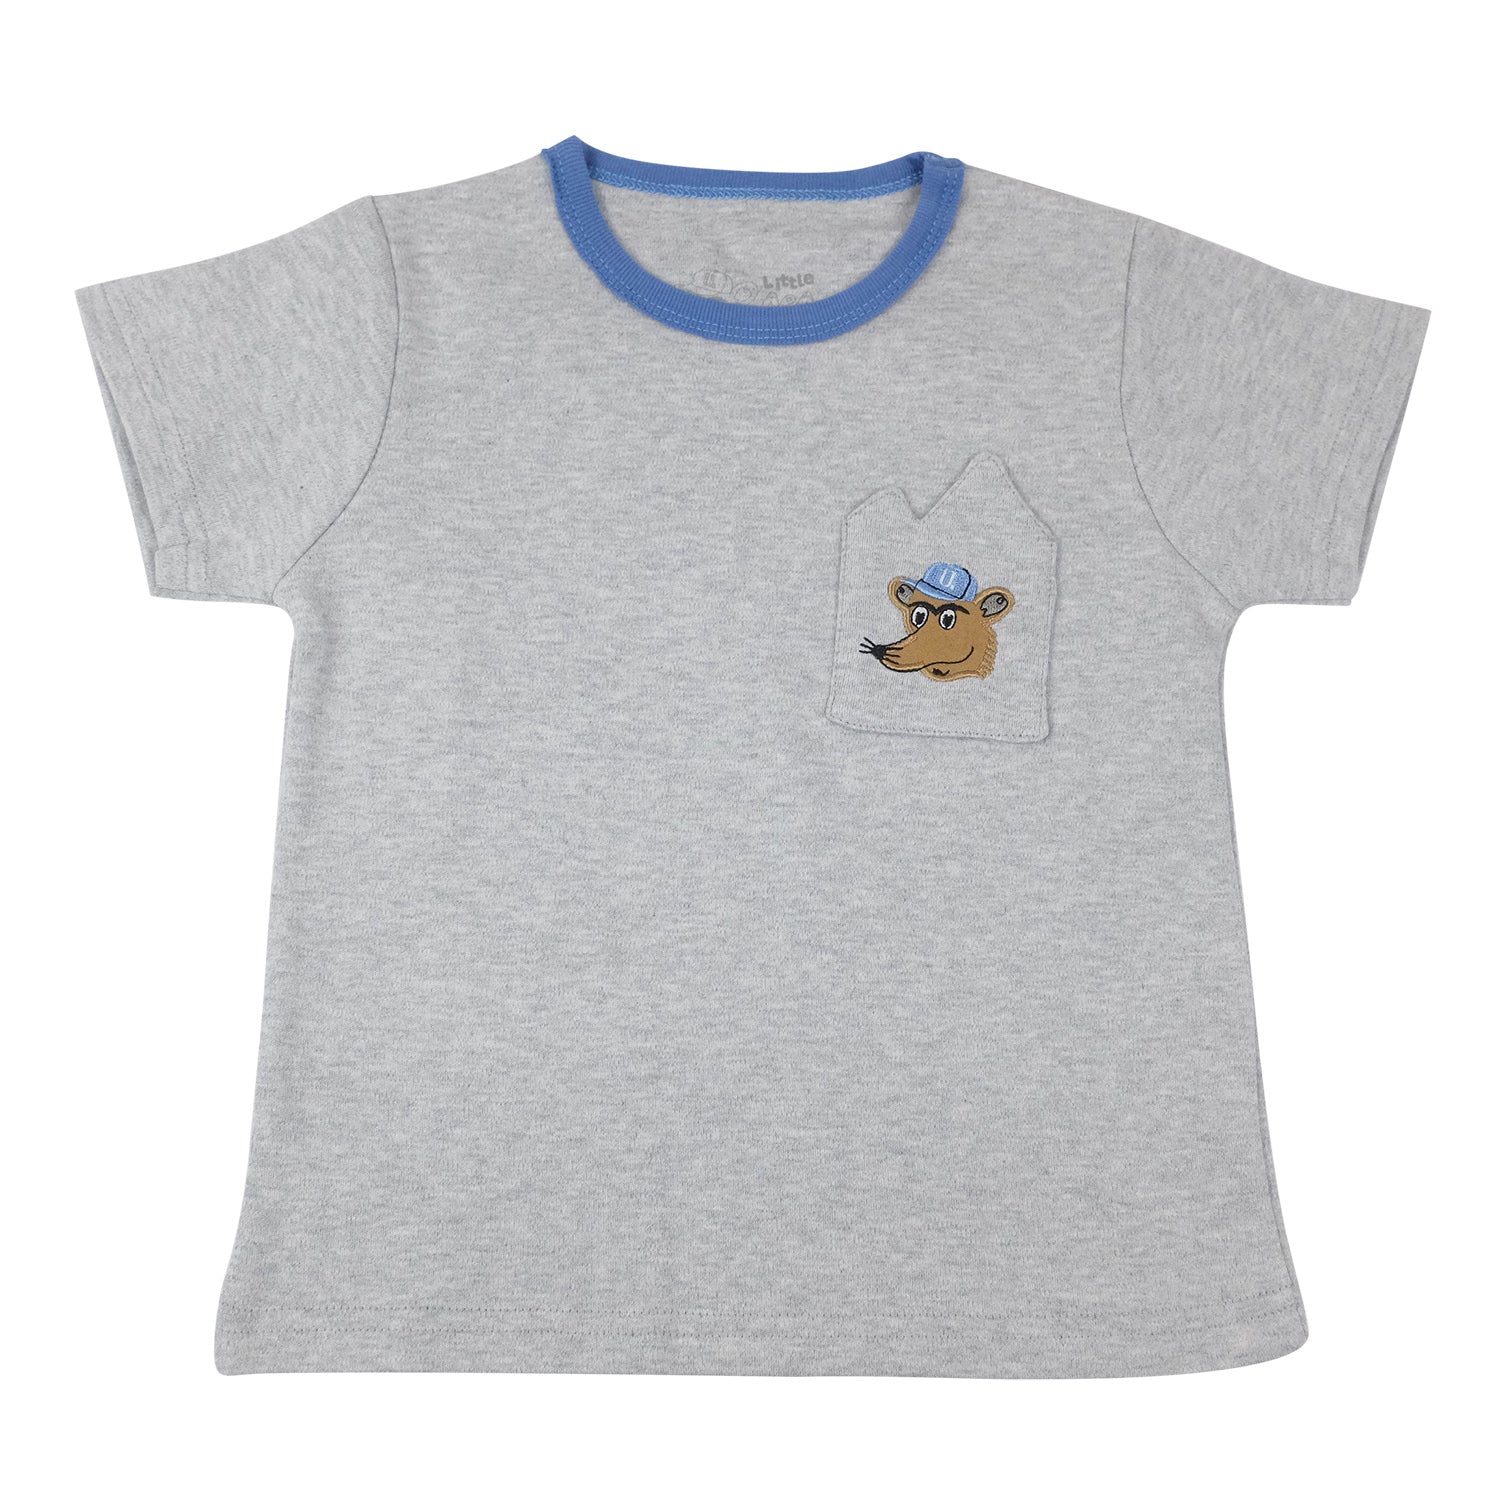 Embroidered Ara the Rat Toddler T-Shirt